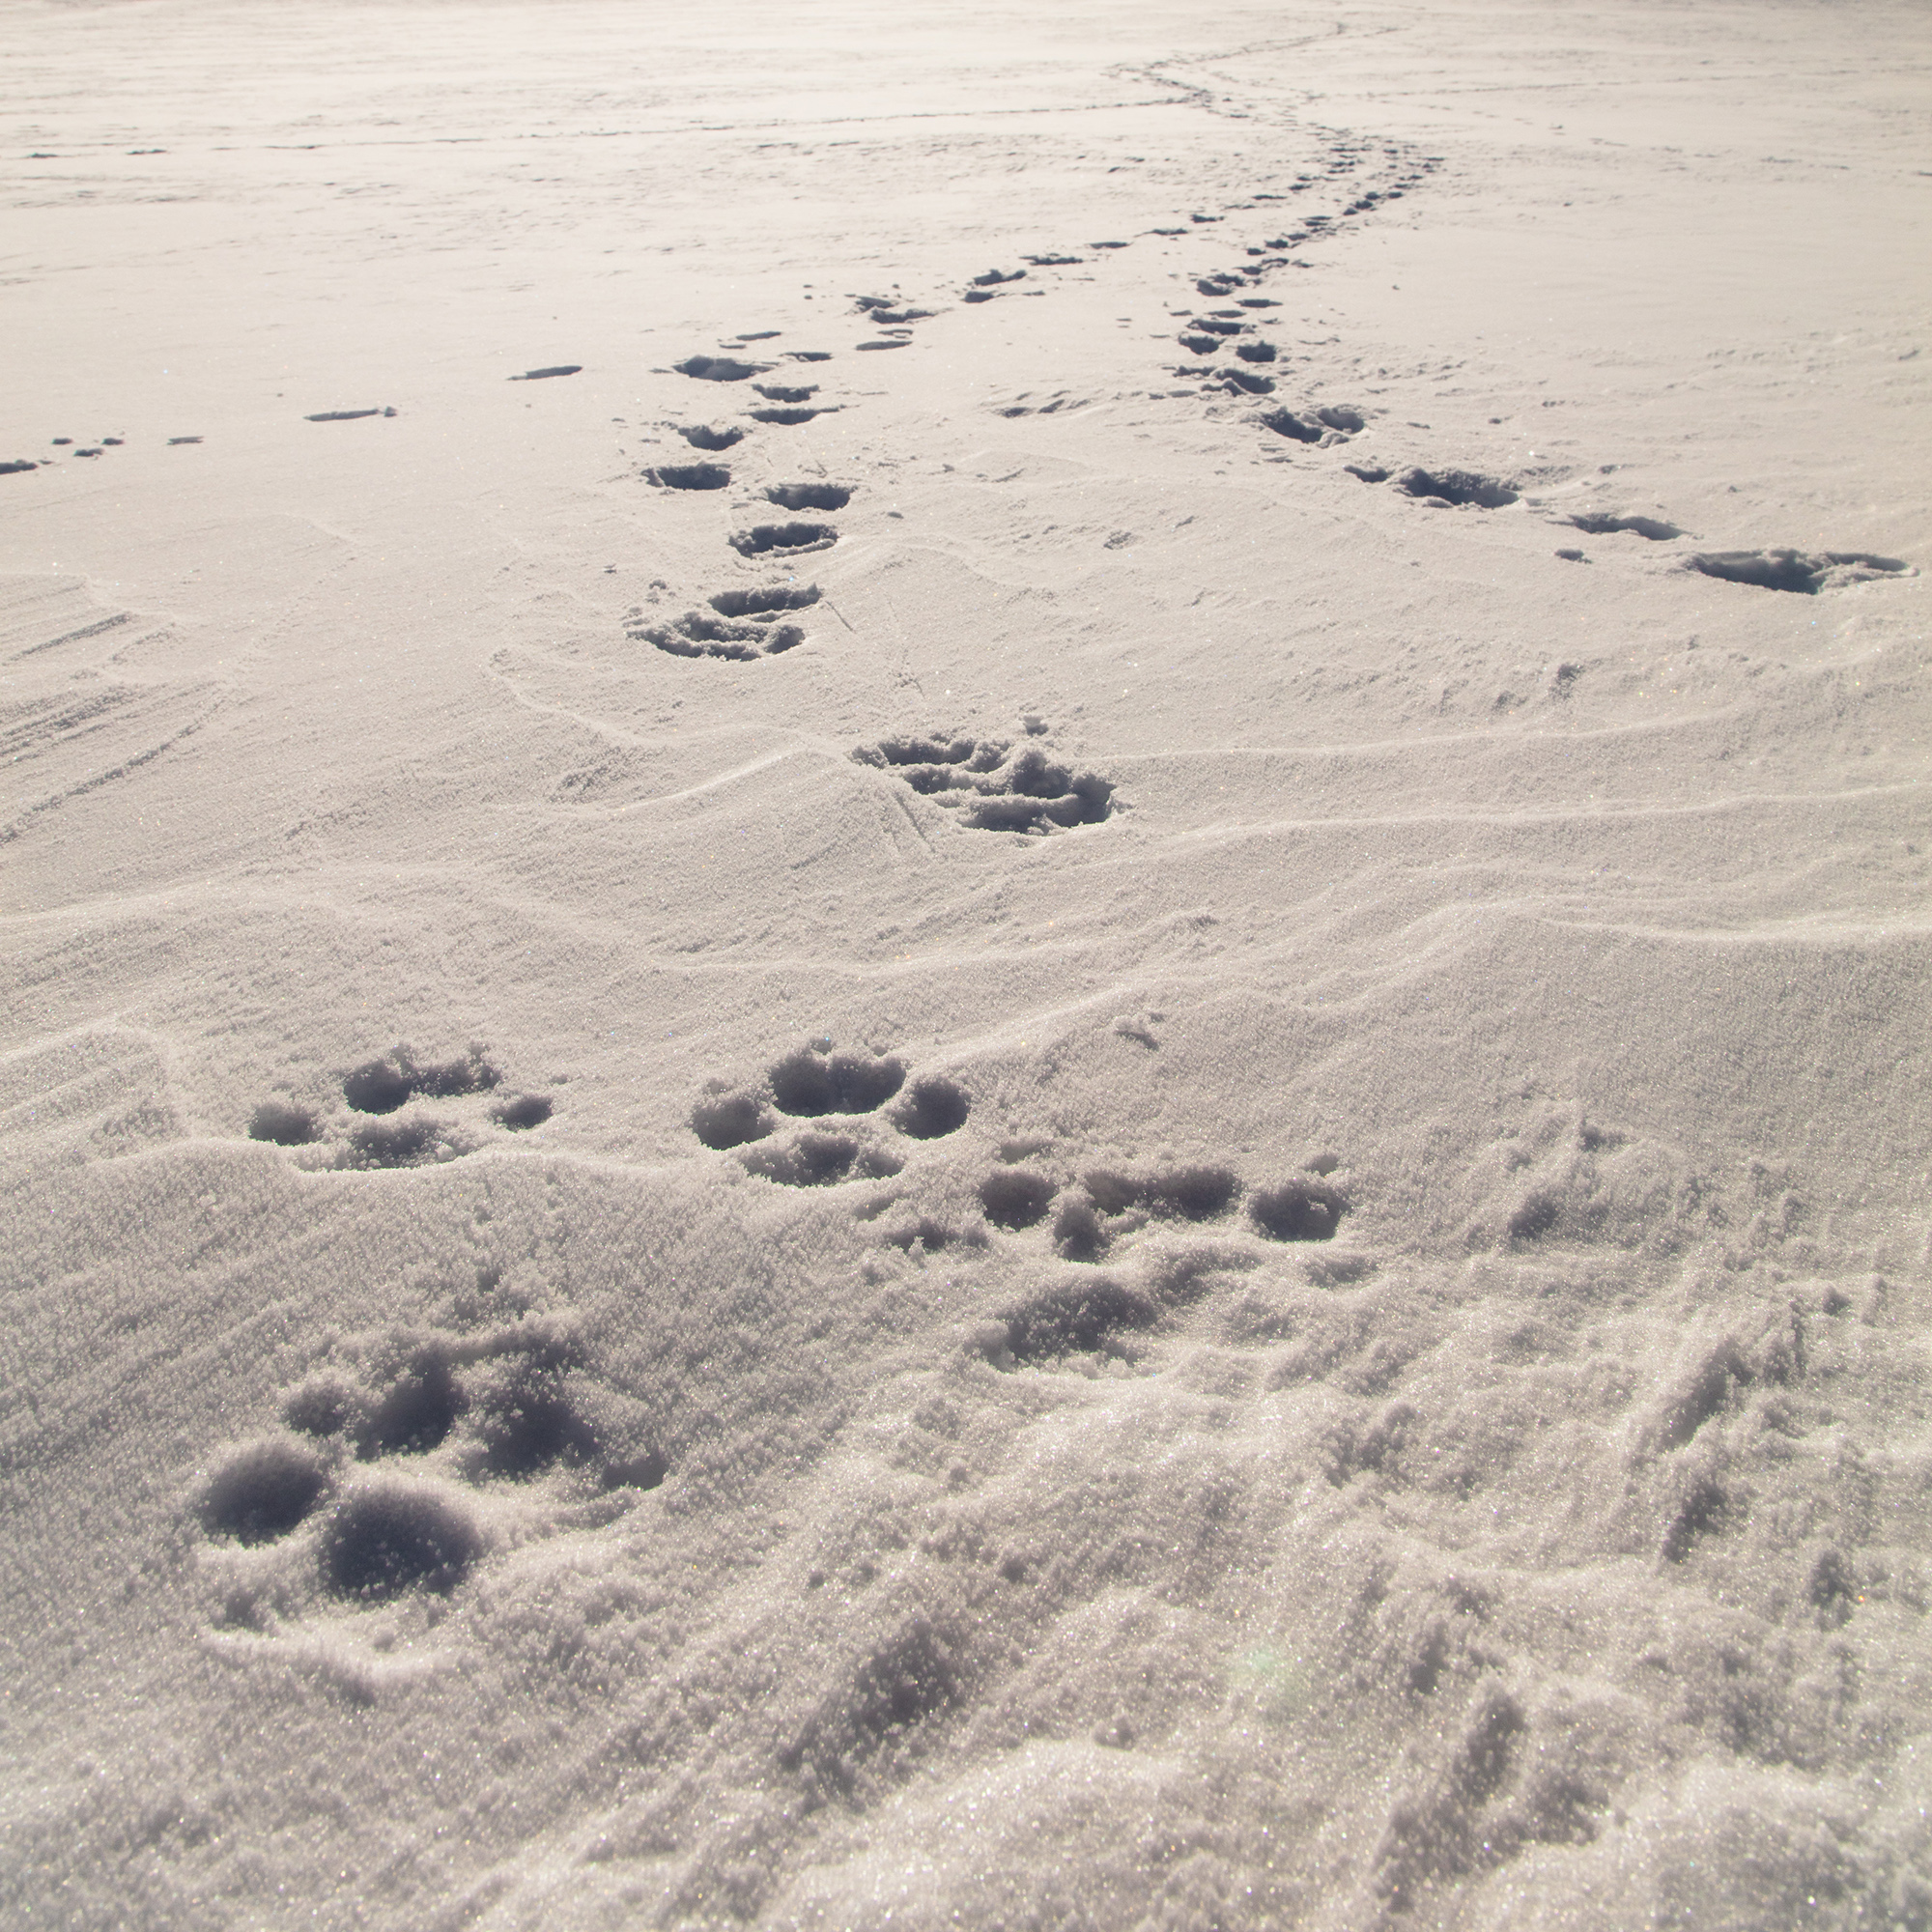 Wolf tracks in the snow.